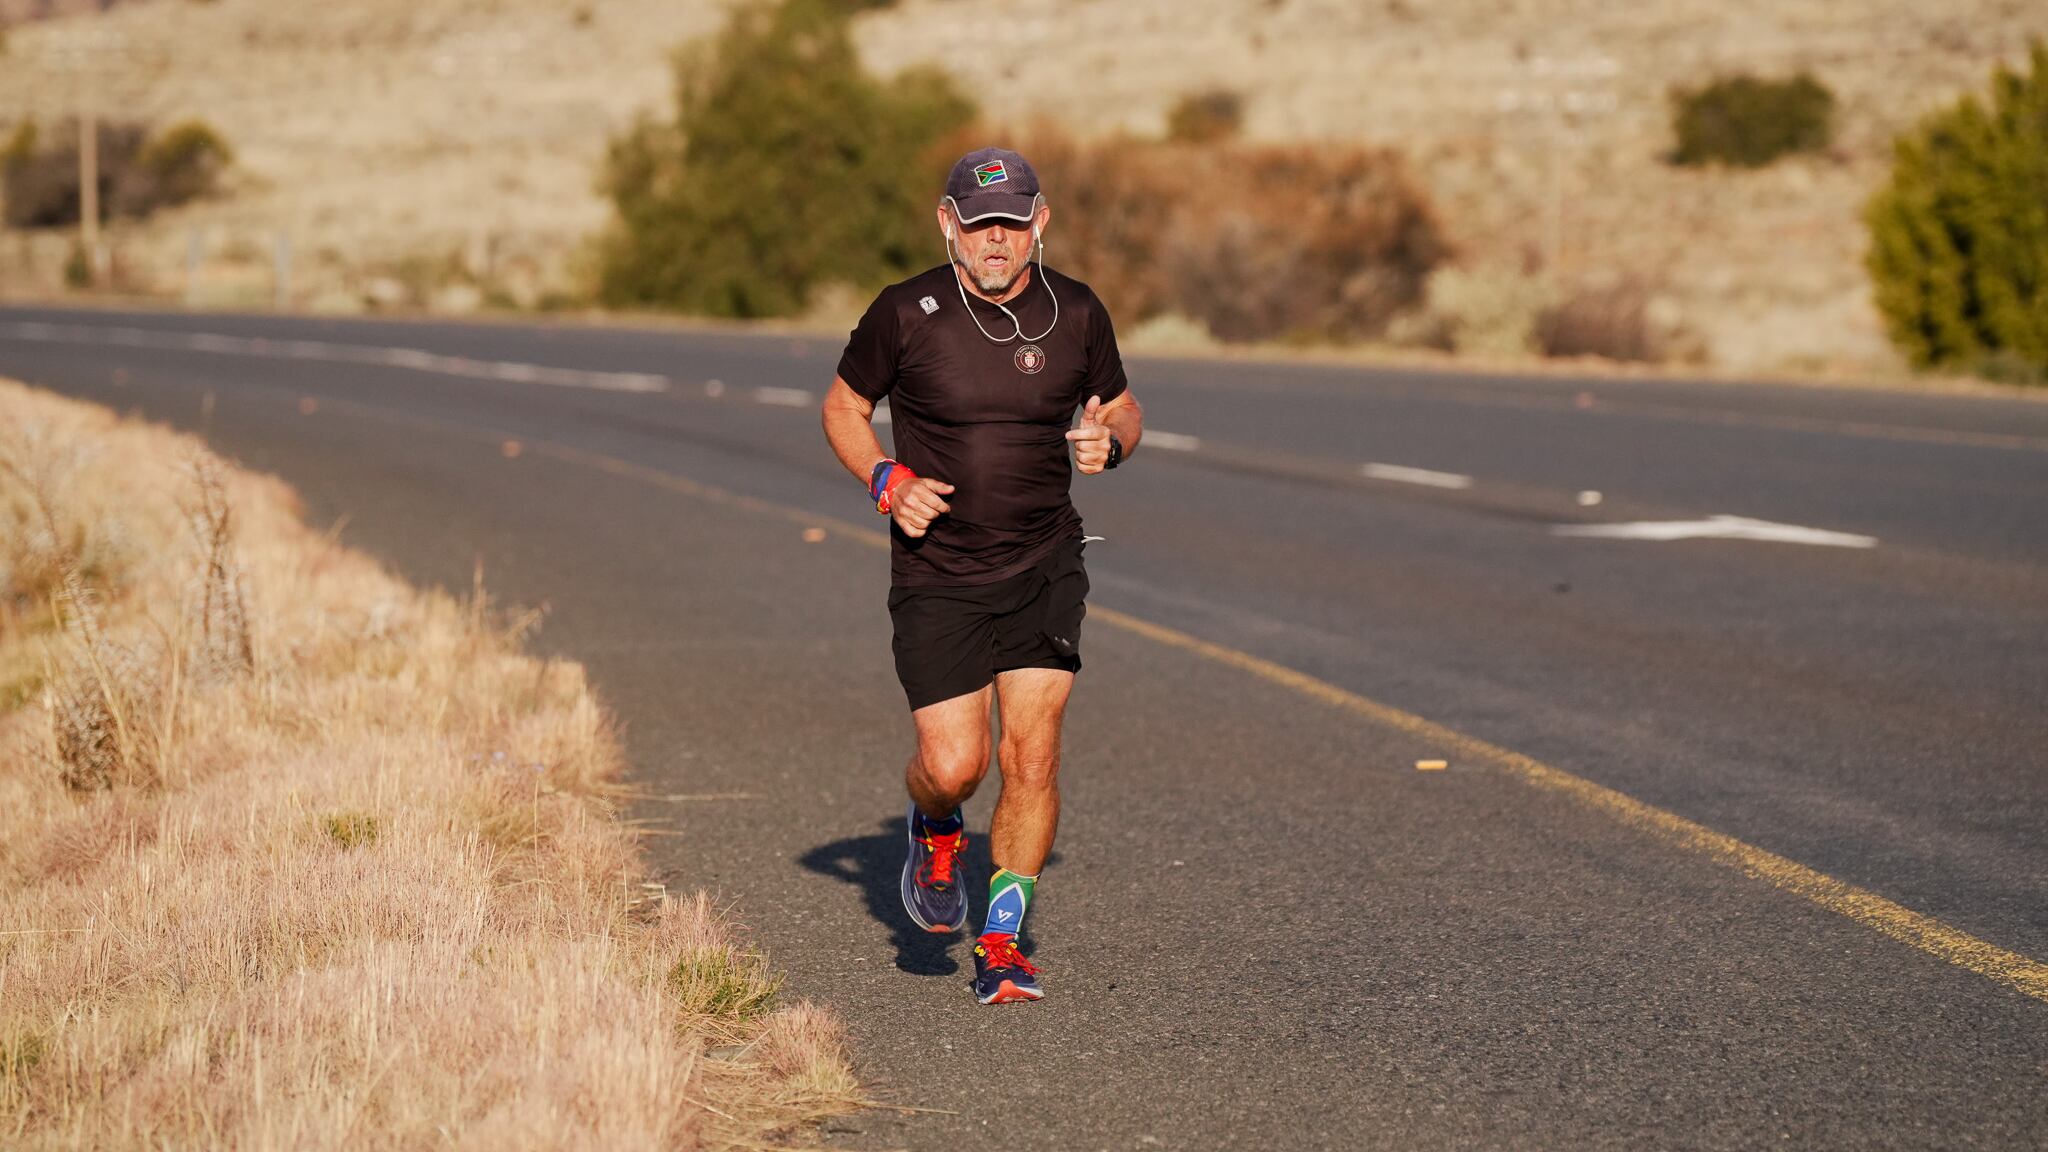 Keith Boyd hopes to become the fastest person to run the length of Africa